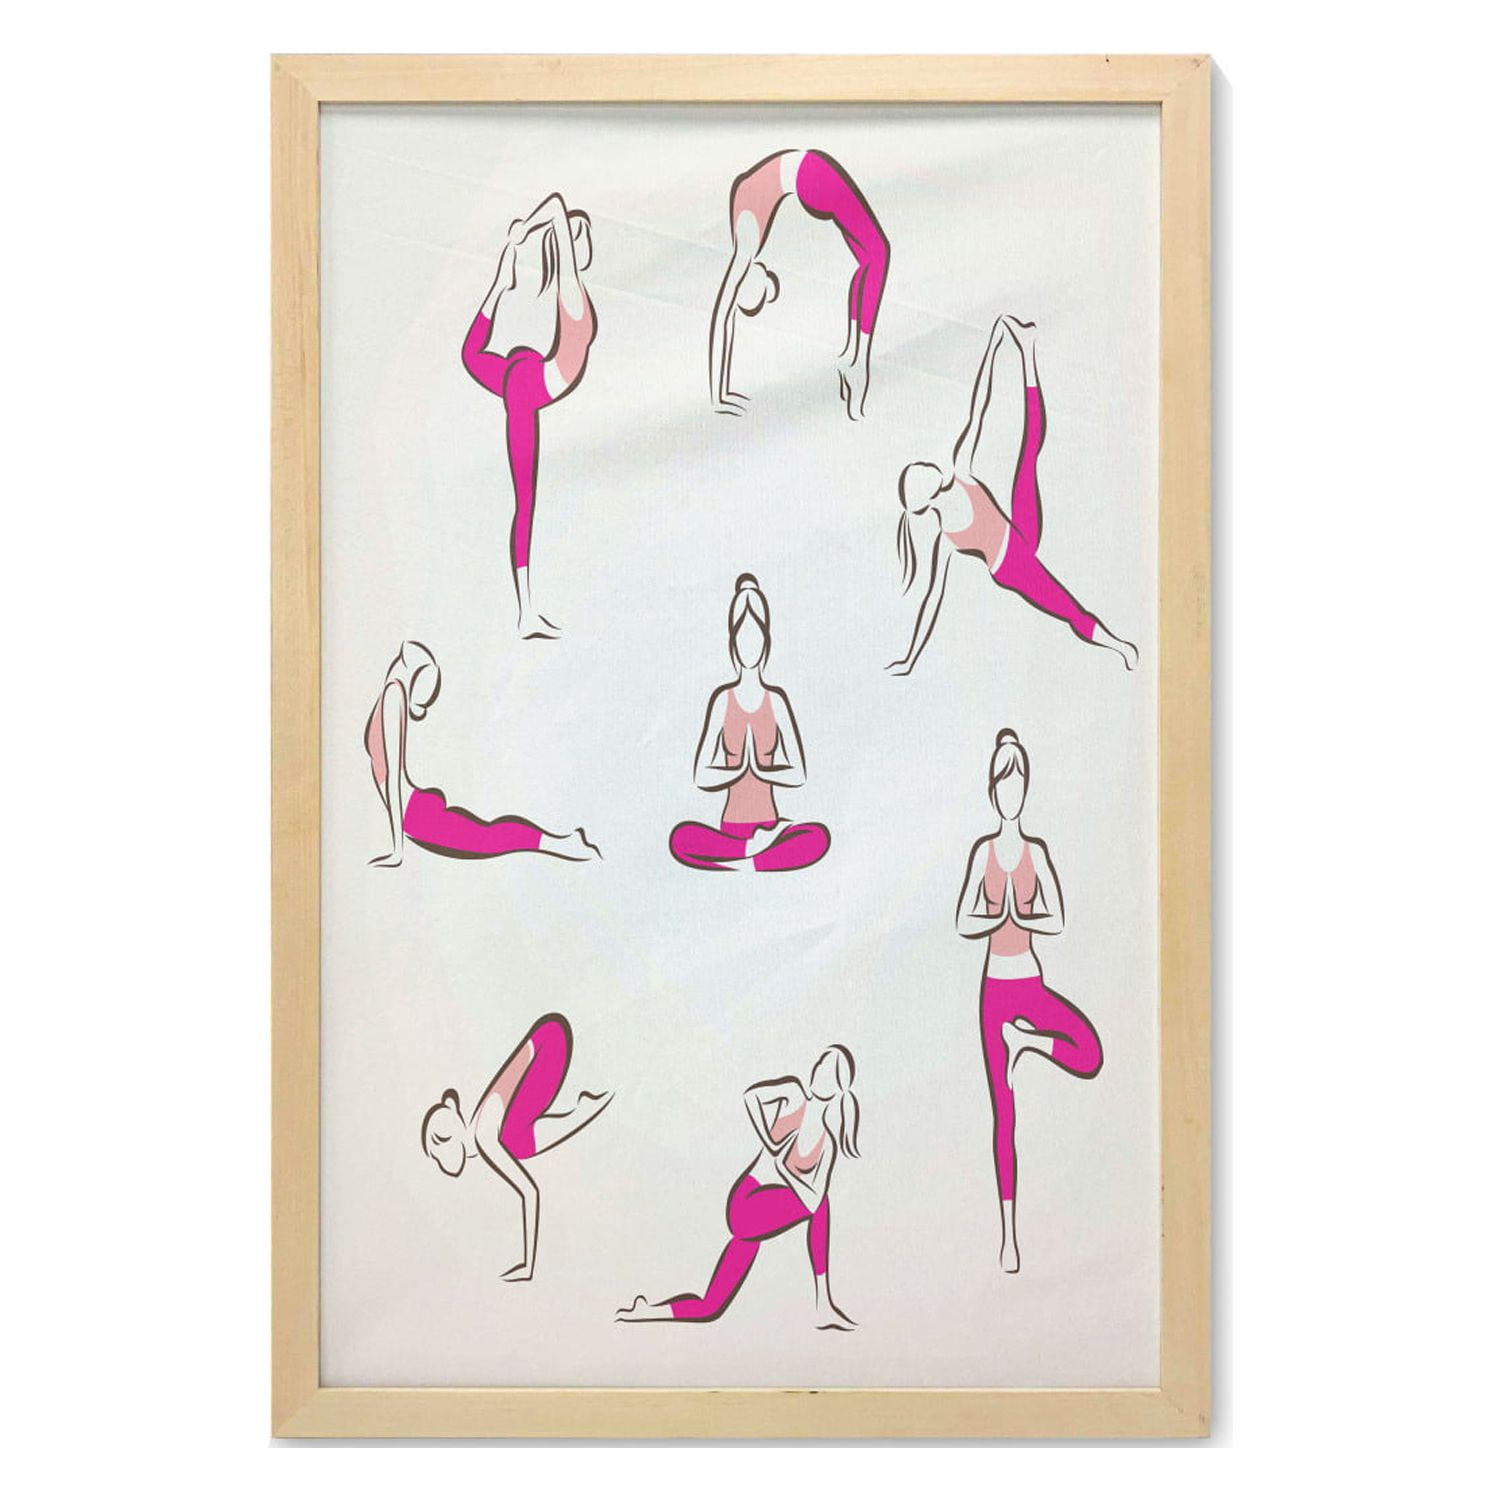 Sikhash Wall Sticker Posters, Yoga Poses Posters (36X24 inches) Yoga Asan  for Full Body, Workout, Mediation Quotes, Yoga Studio, Hall, Big Size. Q29  : Amazon.in: Home & Kitchen